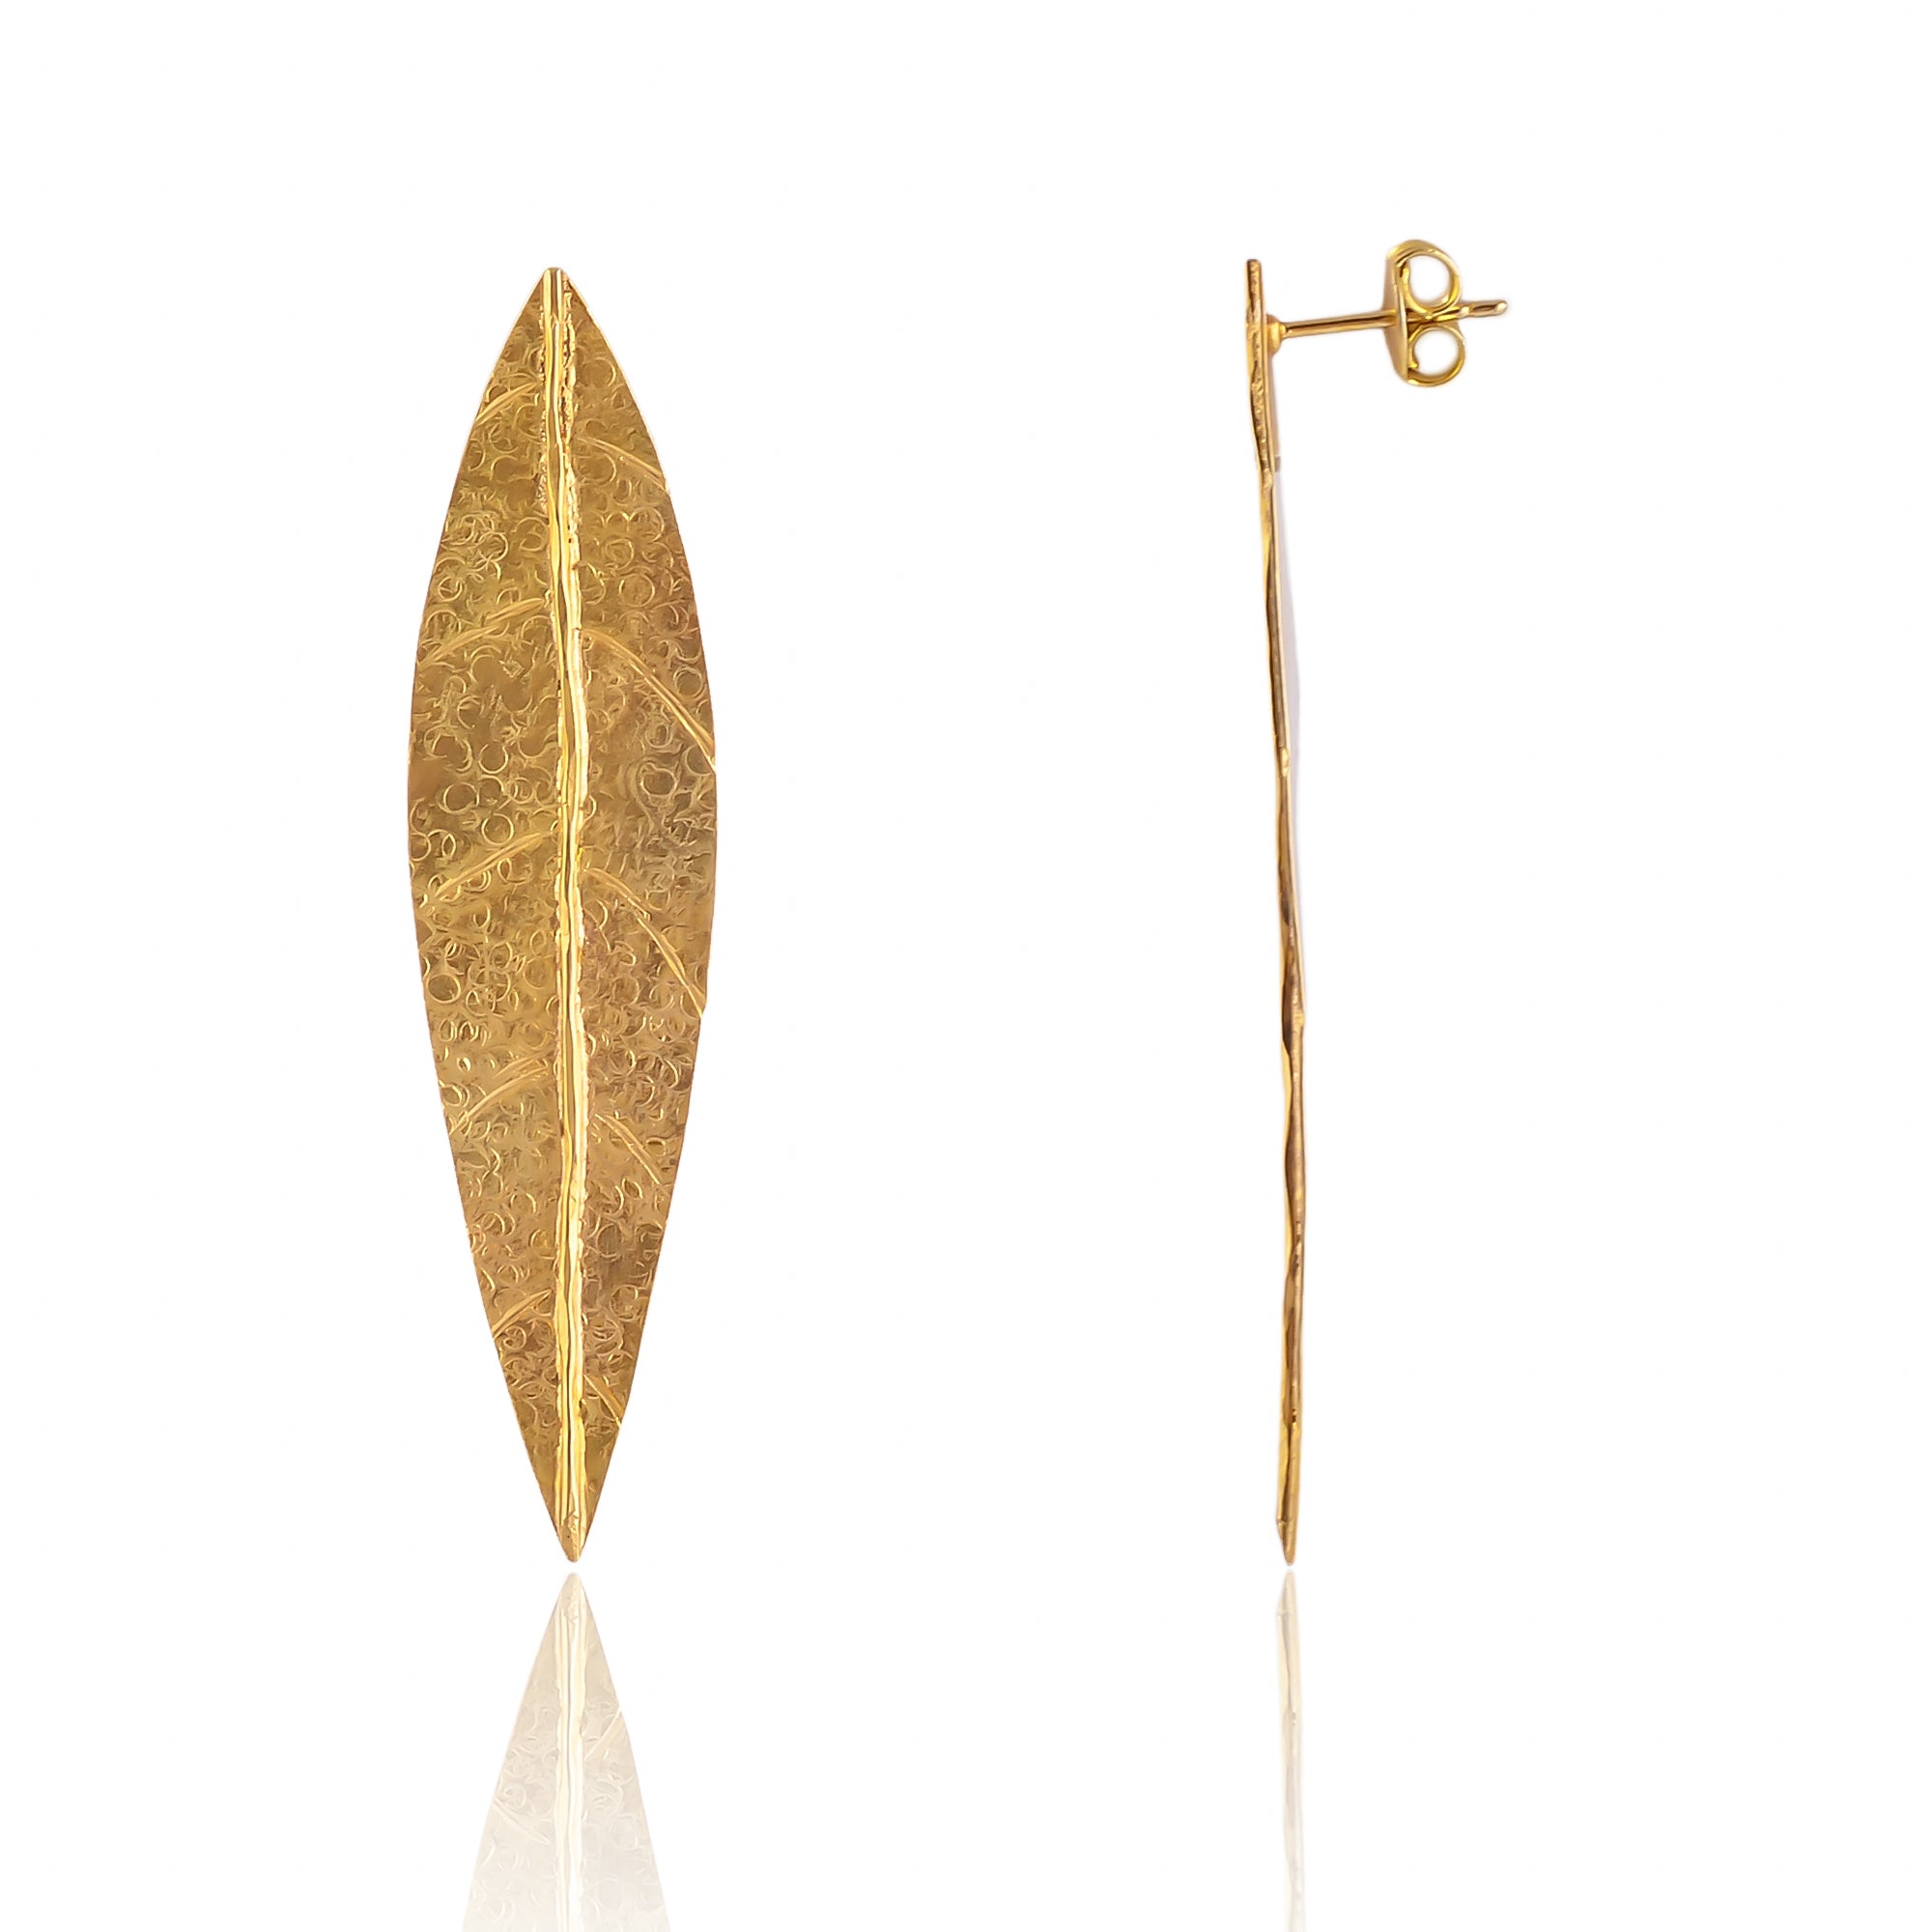 Buy Hand Crafted Silver Gold Plated Texture Leaf Earring